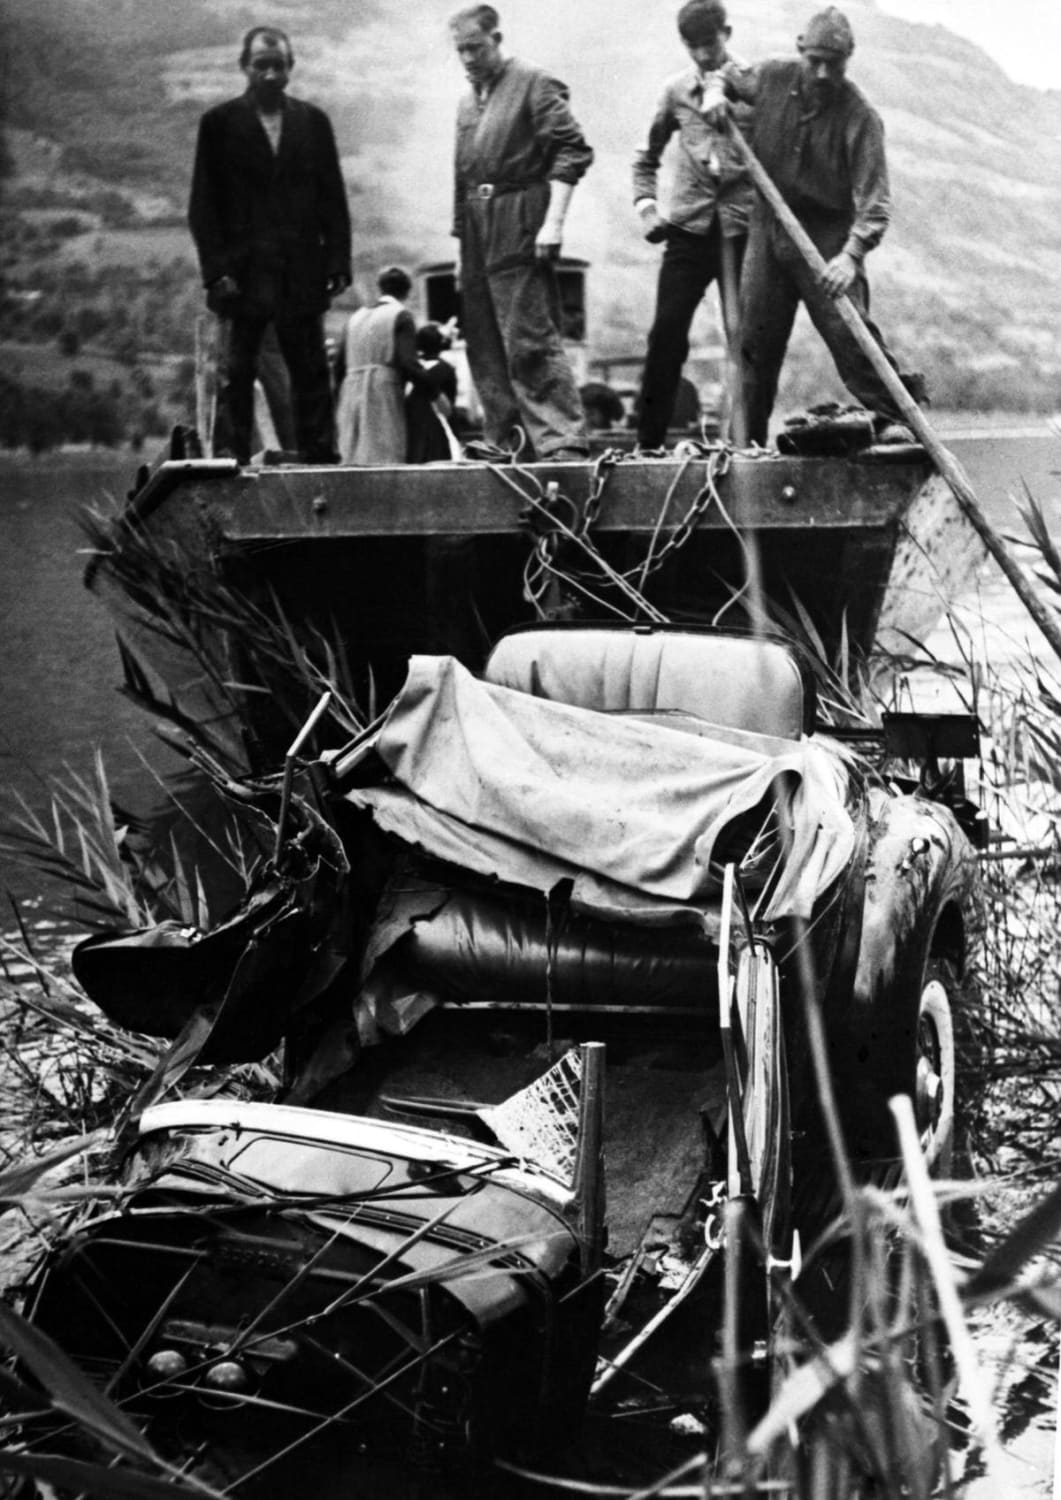 The wrecked car of Queen Astrid of Belgium being salvaged from the lake side near Lucerne, Switzerland on August 30, 1935, after the car crash in which she was killed while driving with her husband the day before. AP